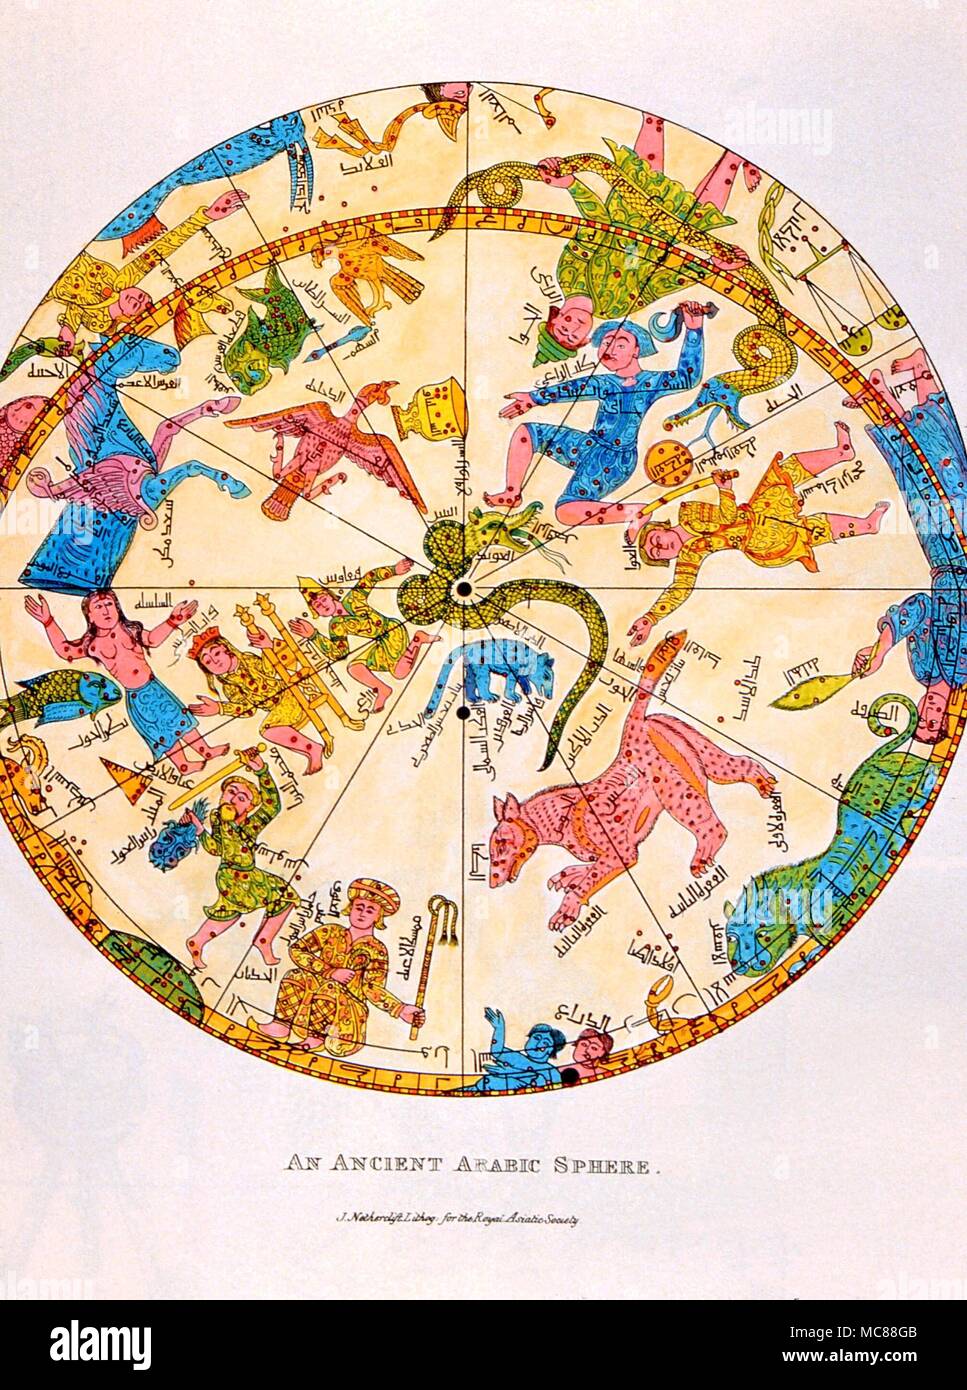 ASTROLOGY - Arabic Northern constellations according to an Arabic star map. After a 19th century lithograph Stock Photo